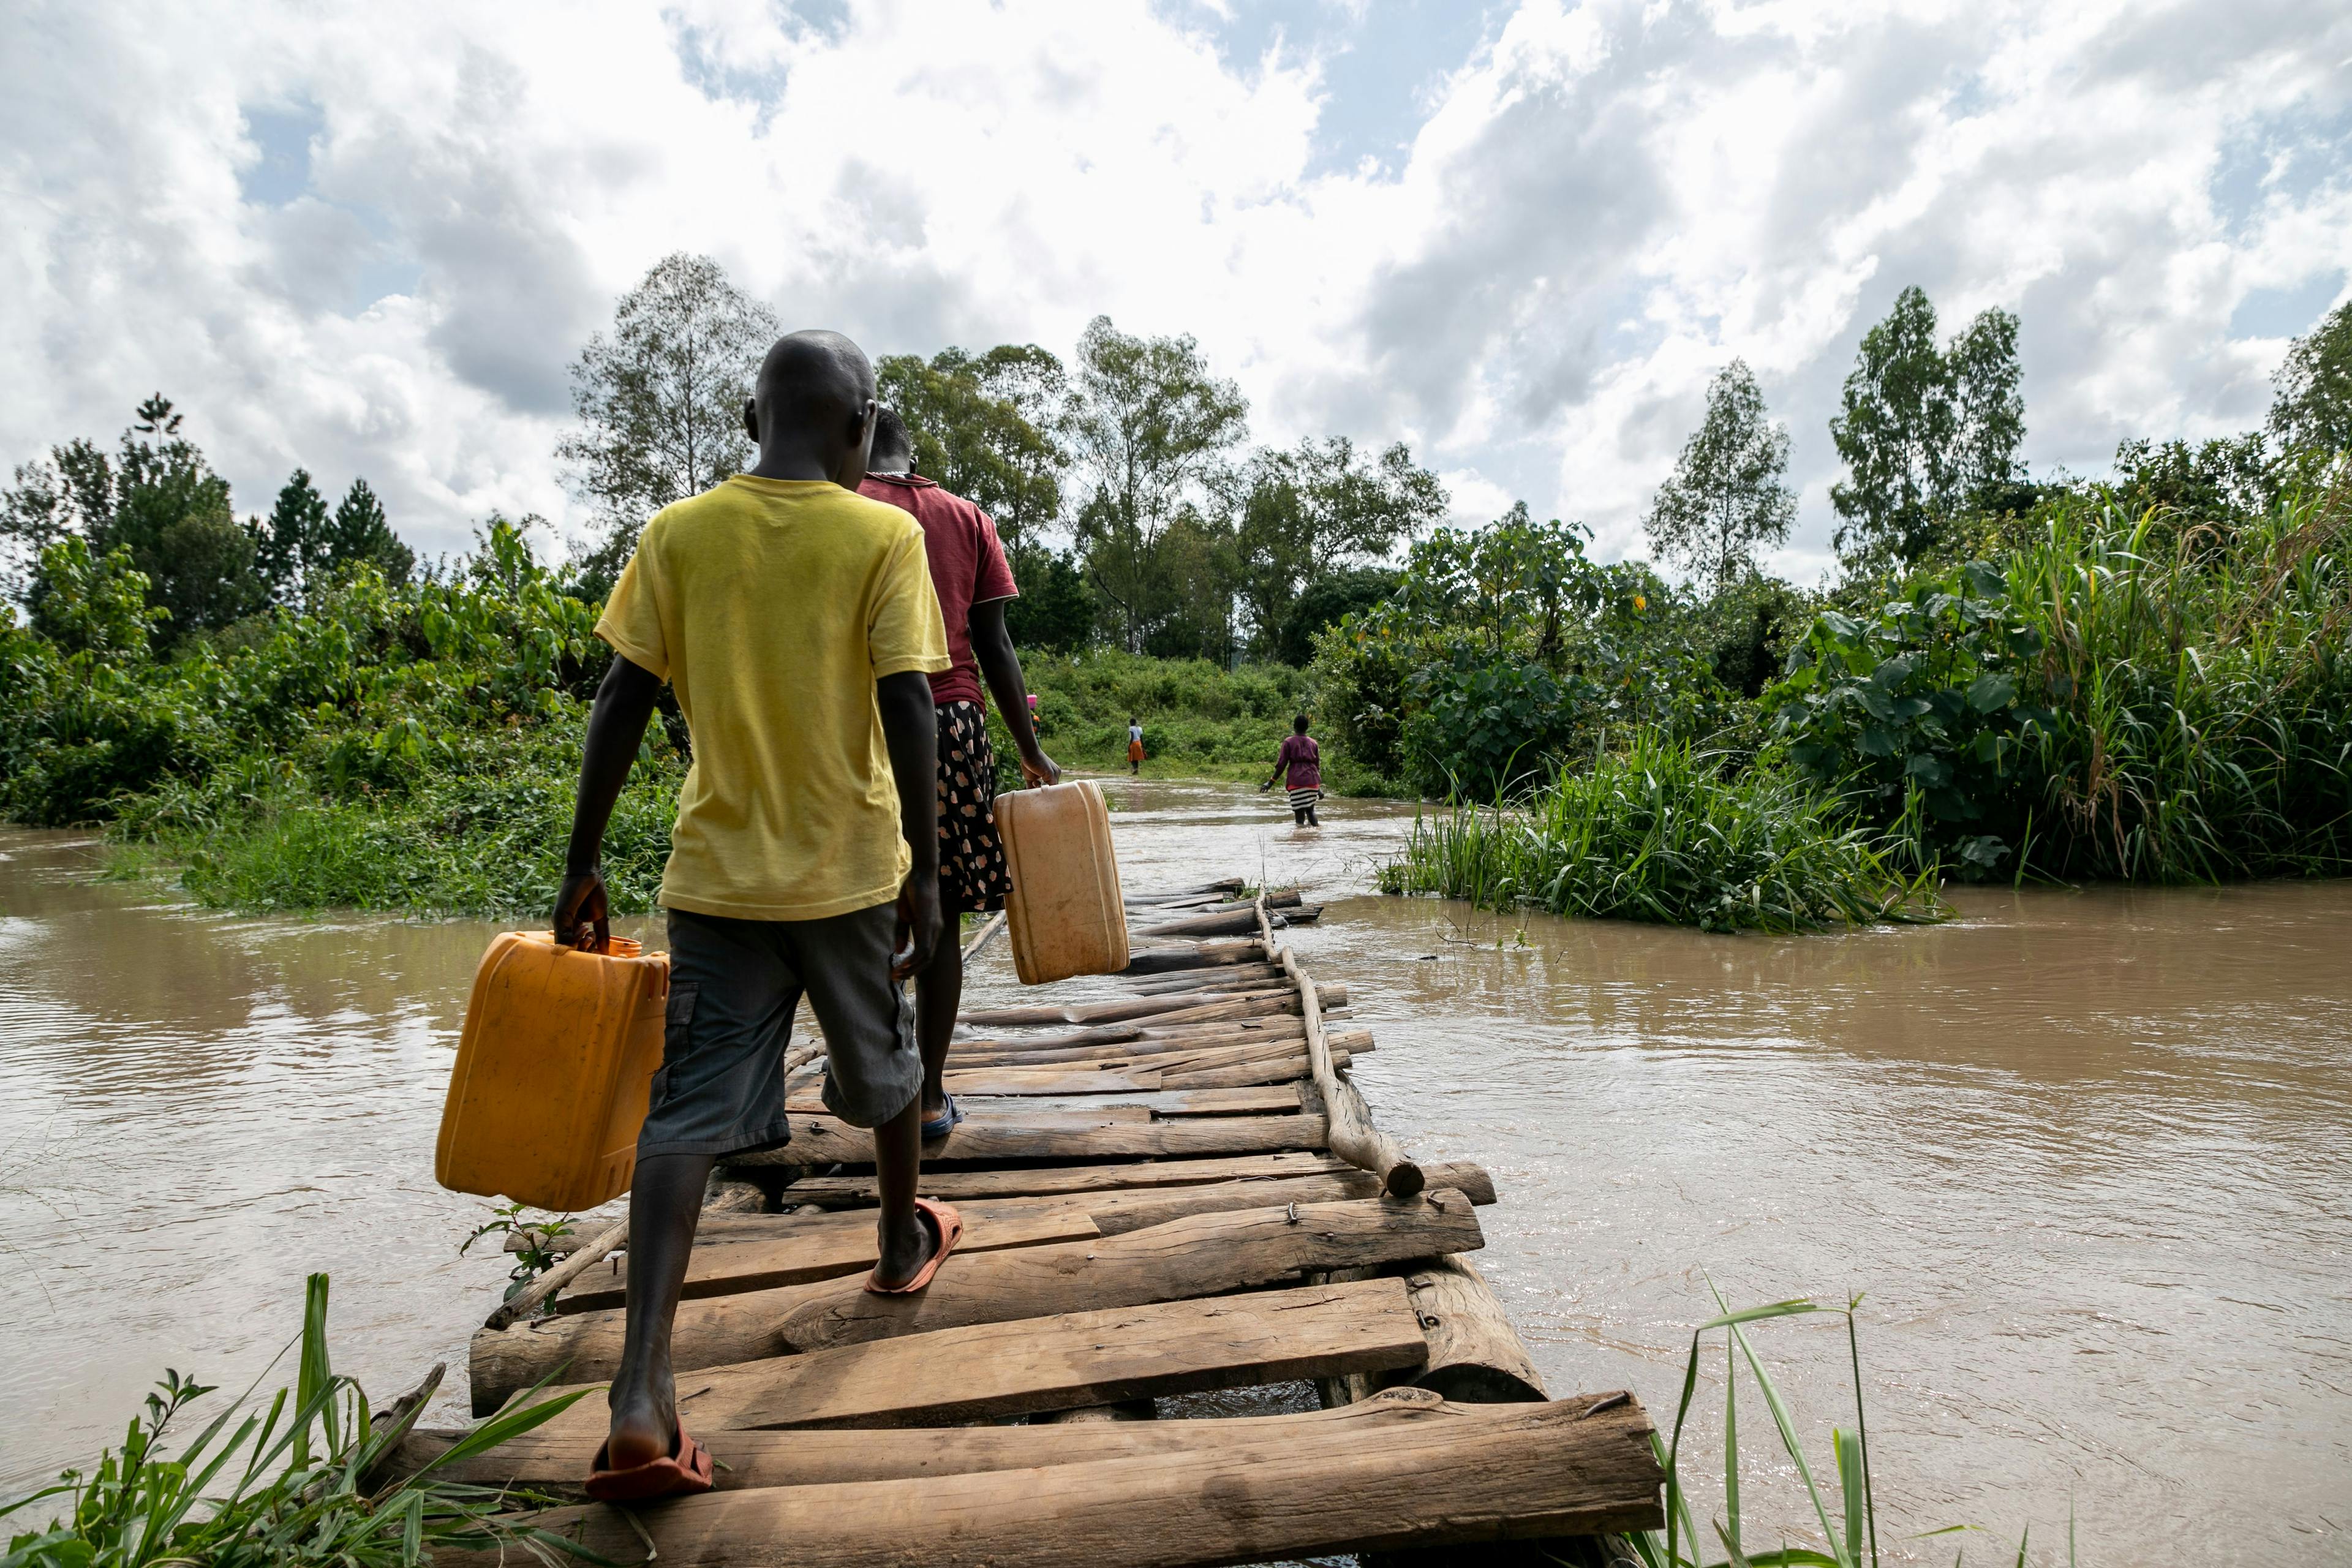 A temporary bridge allows foot traffic to cross the river after the original was washed away. Border areas often receive less support than capital cities. They need local cooperative solutions as climate mobility boosts cross-border connections. 